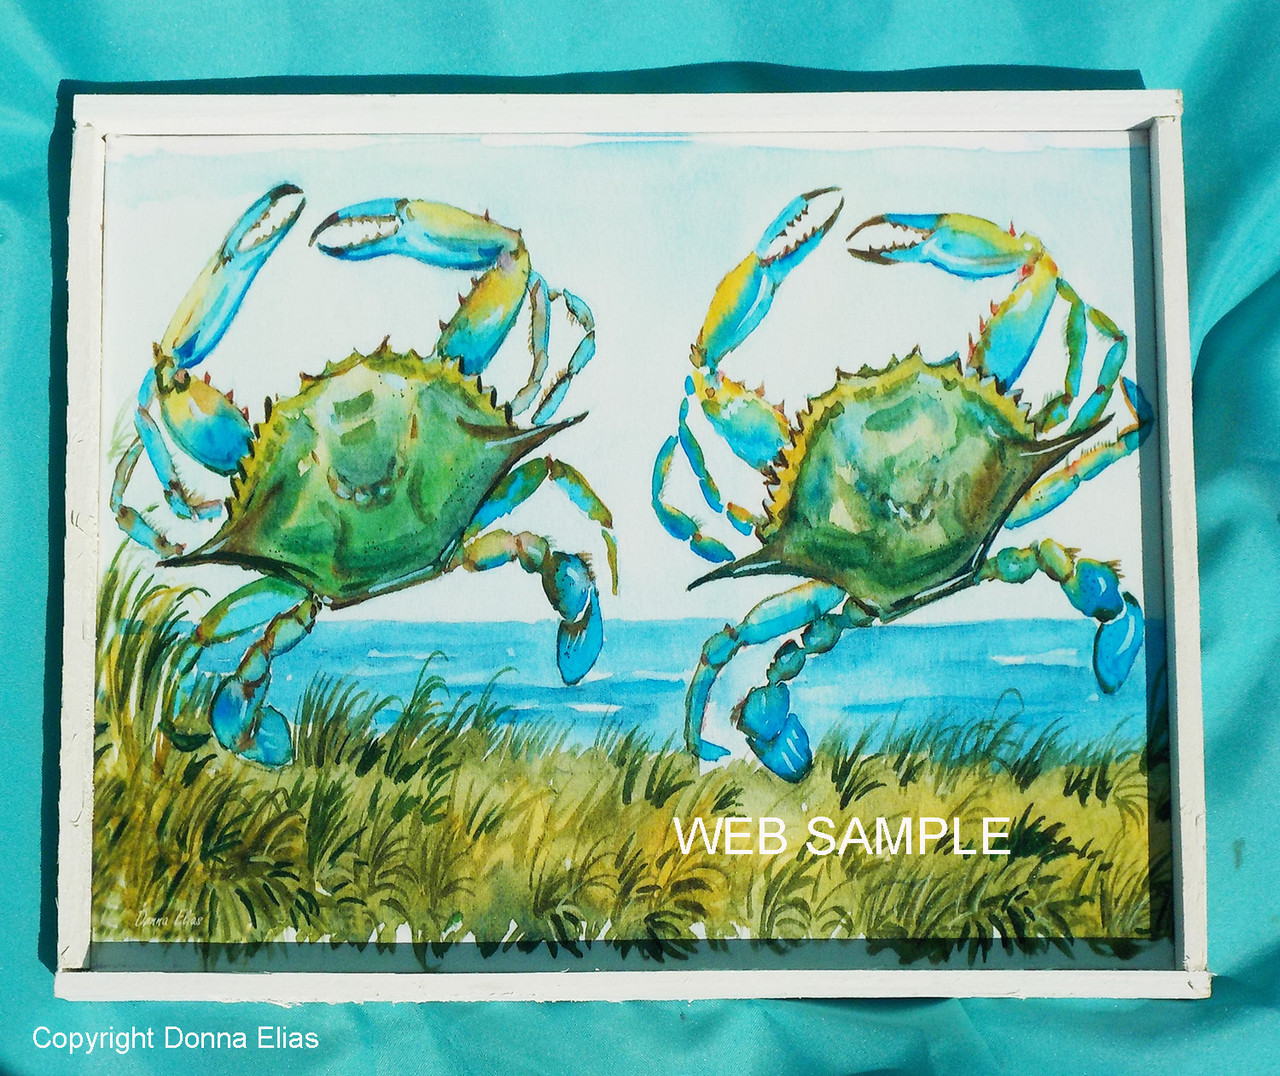 Dancing Crabs copyright Donna Elias in 11" x 14" Rustic White Sand Dune Fence Frame.